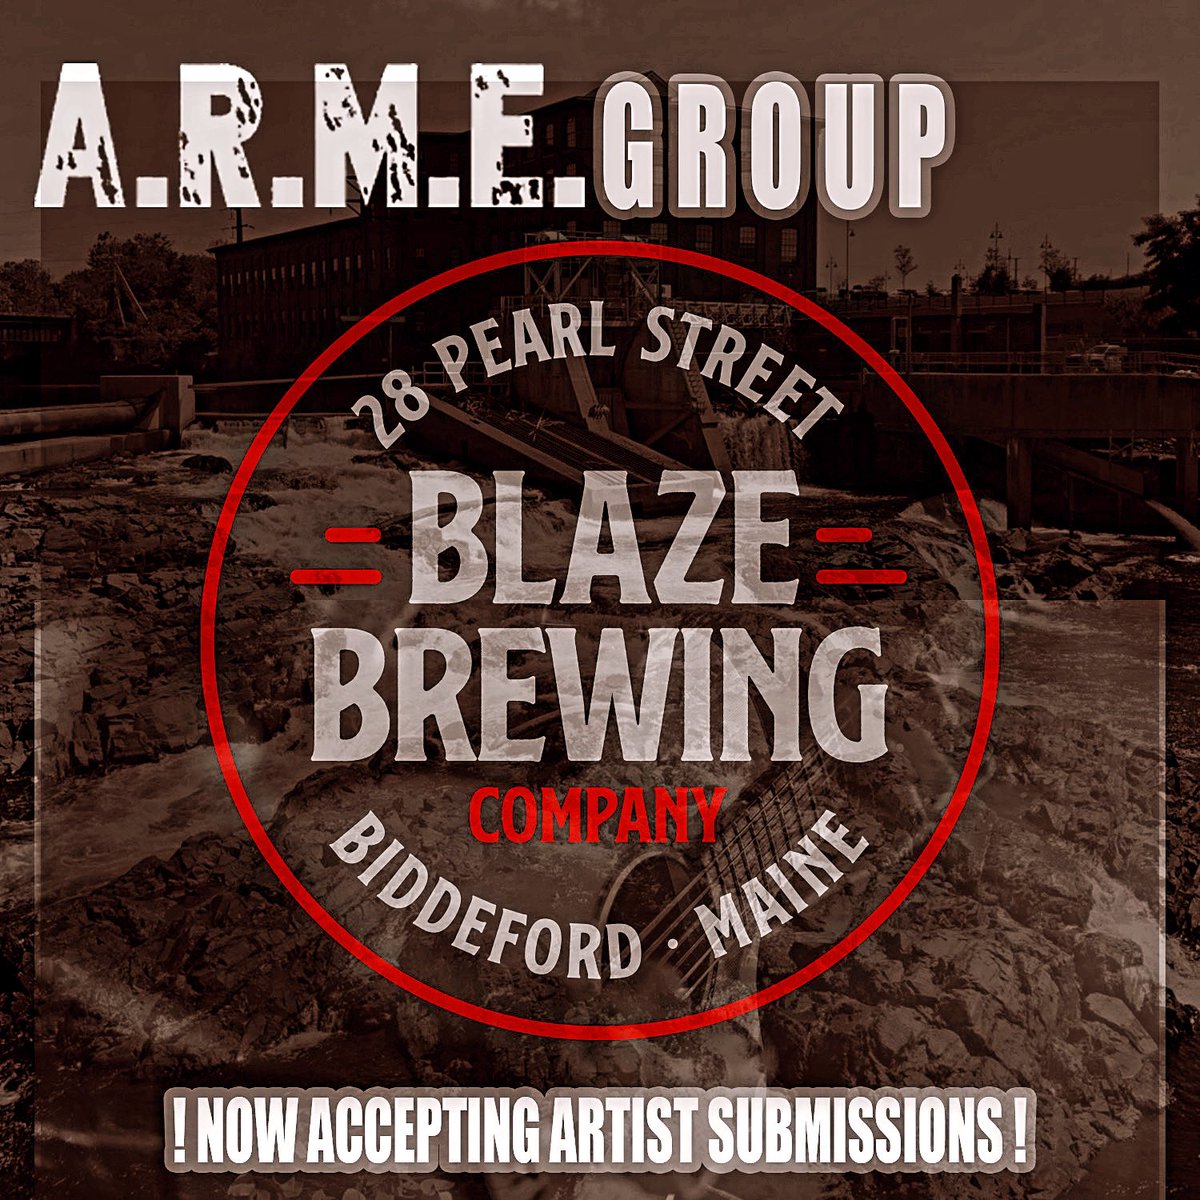 We are thrilled to announce that we have partnered with #blazebrewingco in #biddefordmaine and will be taking over the talent buying | event promotions for the venue. Now accepting submissions for all upcoming dates - interested in performing? Email thearmegroup@gmail.com 🪖‼️